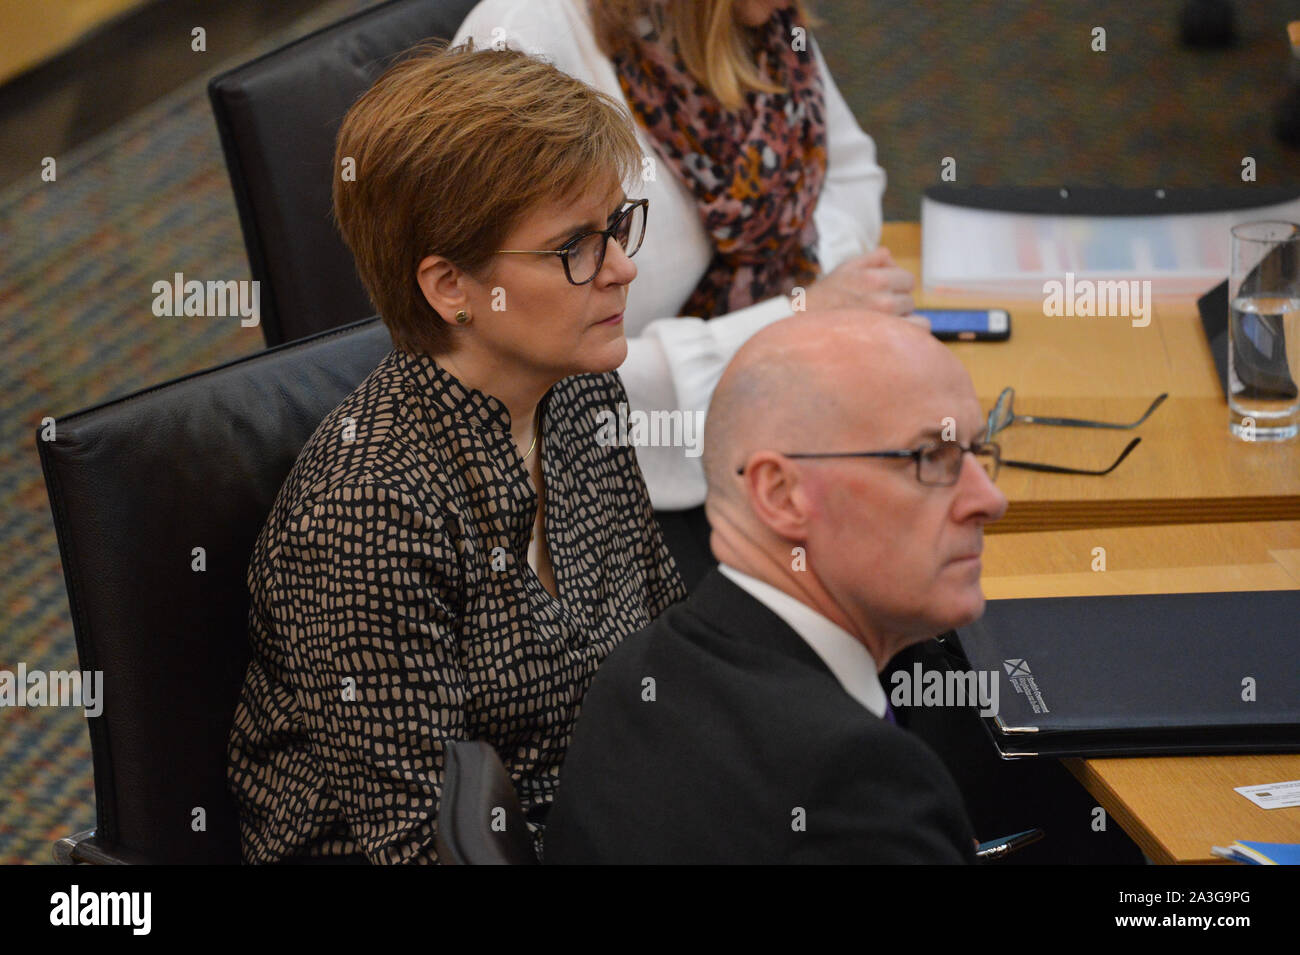 Edinburgh, 8 October 2019. Pictured: (L-R) Nicola Sturgeon MSP - First Minister of Scotland and Leader of the Scottish National Party (SNP); John Swinney MSP - Depute First Minister of Scotland. A report has been published detailing the range of measures being put in place by the Scottish Government to mitigate a ‘no deal' Brexit. Credit: Colin Fisher/Alamy Live News Stock Photo